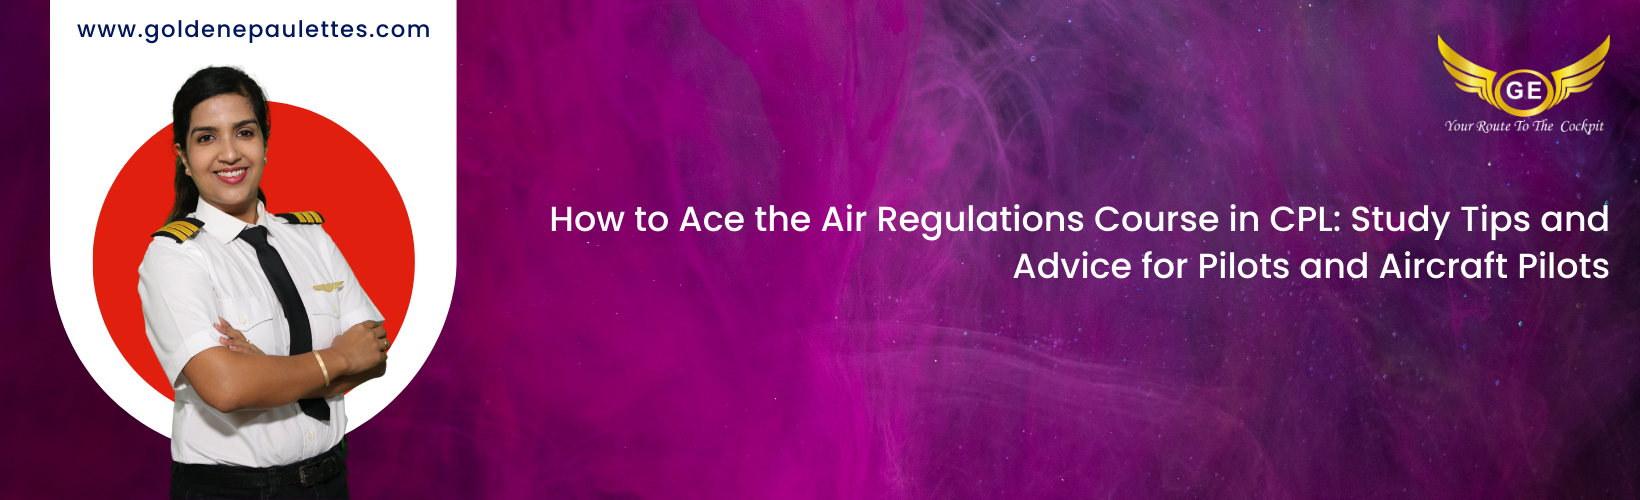 How to Prepare for the Air Regulations Course in CPL